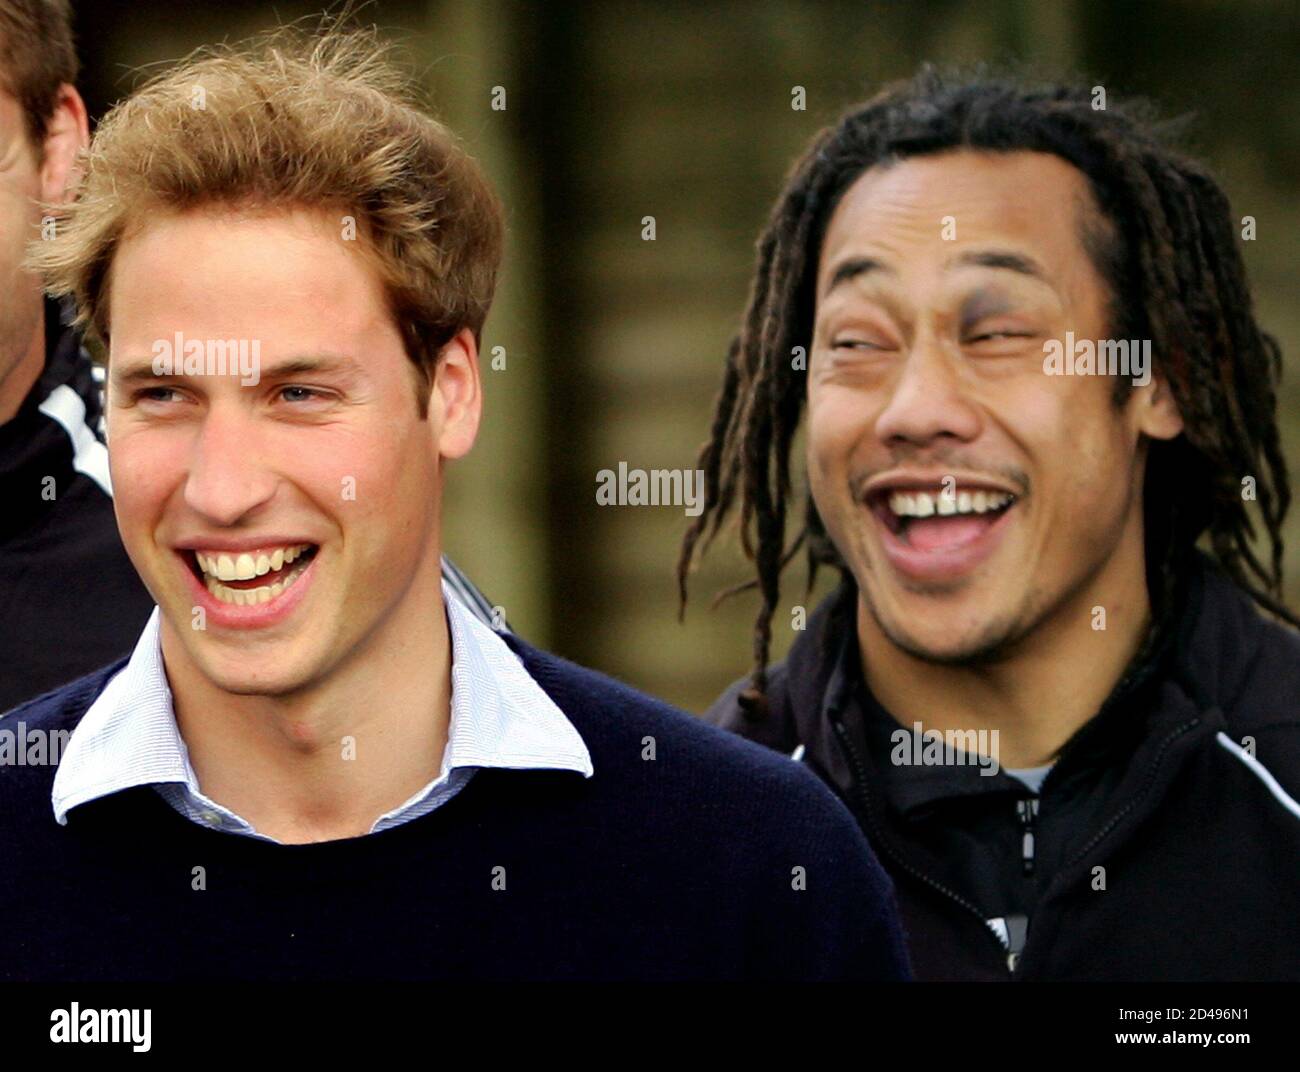 Britain's Prince William laughs with captain of the All Blacks Tana Umaga at a public training session in Auckland.  Britain's Prince William (L) laughs with captain of the All Blacks Tana Umaga at a public training session in Auckland July 4, 2005. Prince William, who graduated recently from Scotland's St Andrews University, met the All Black team two days after they defeated the British and Irish Lions in Wellington and took an unbeatable 2-0 lead in the best-of-three test series. Prince William is also performing official duties during his ten-day tour of New Zealand, his first official tou Foto de stock